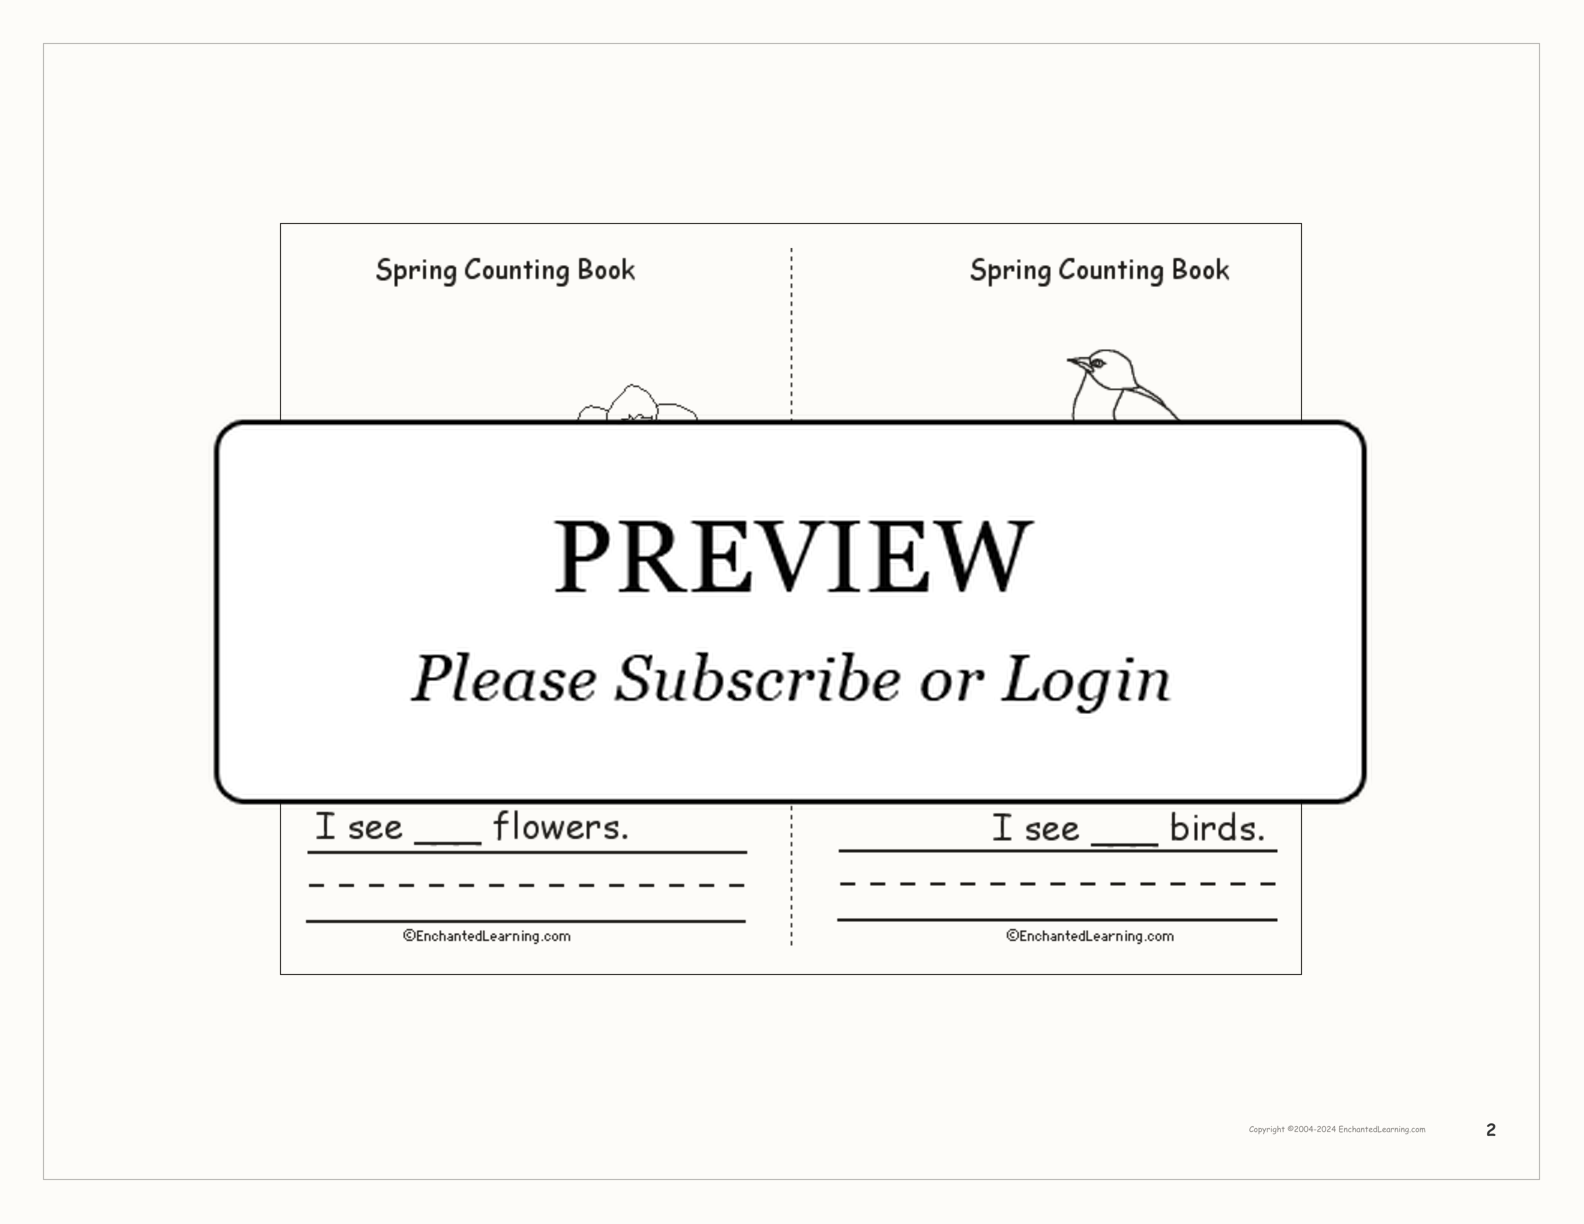 Spring Counting Book interactive worksheet page 2